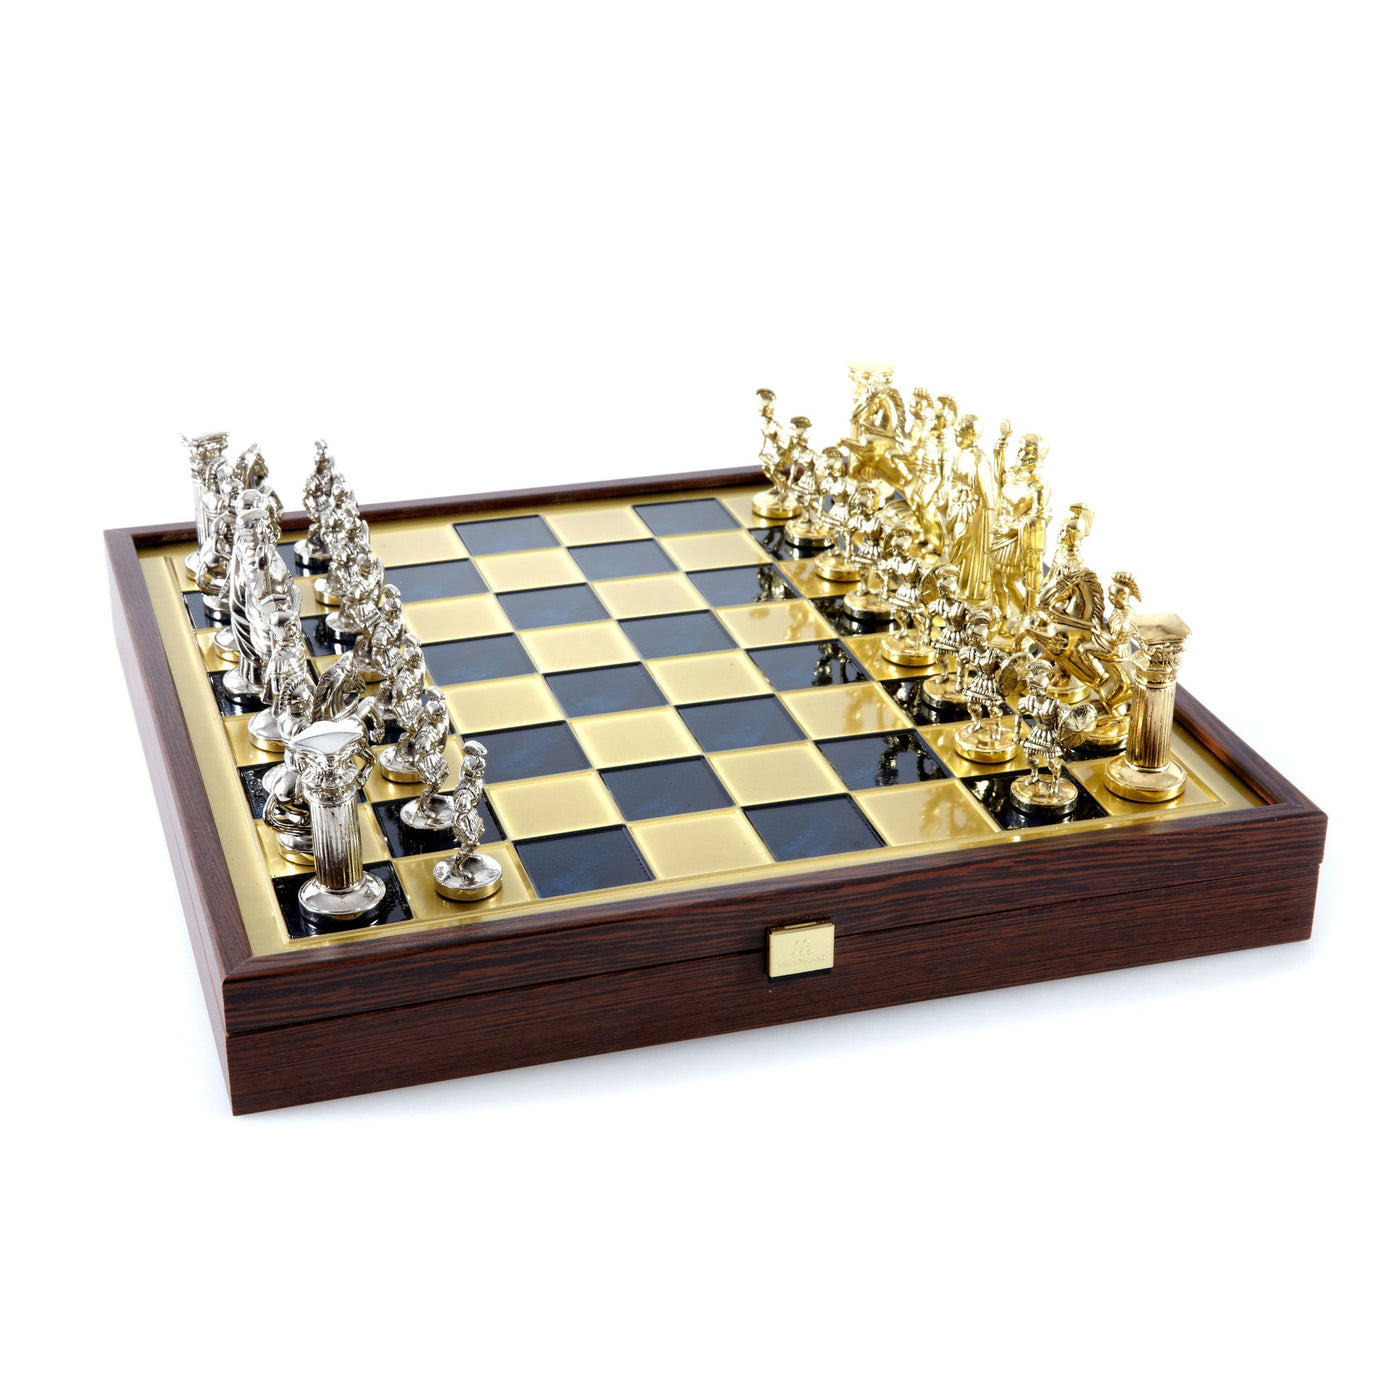 Greek Roman Period Metal Chess set with Gold and Silver Chessmen/Blue Chessboard 41cm on wooden box